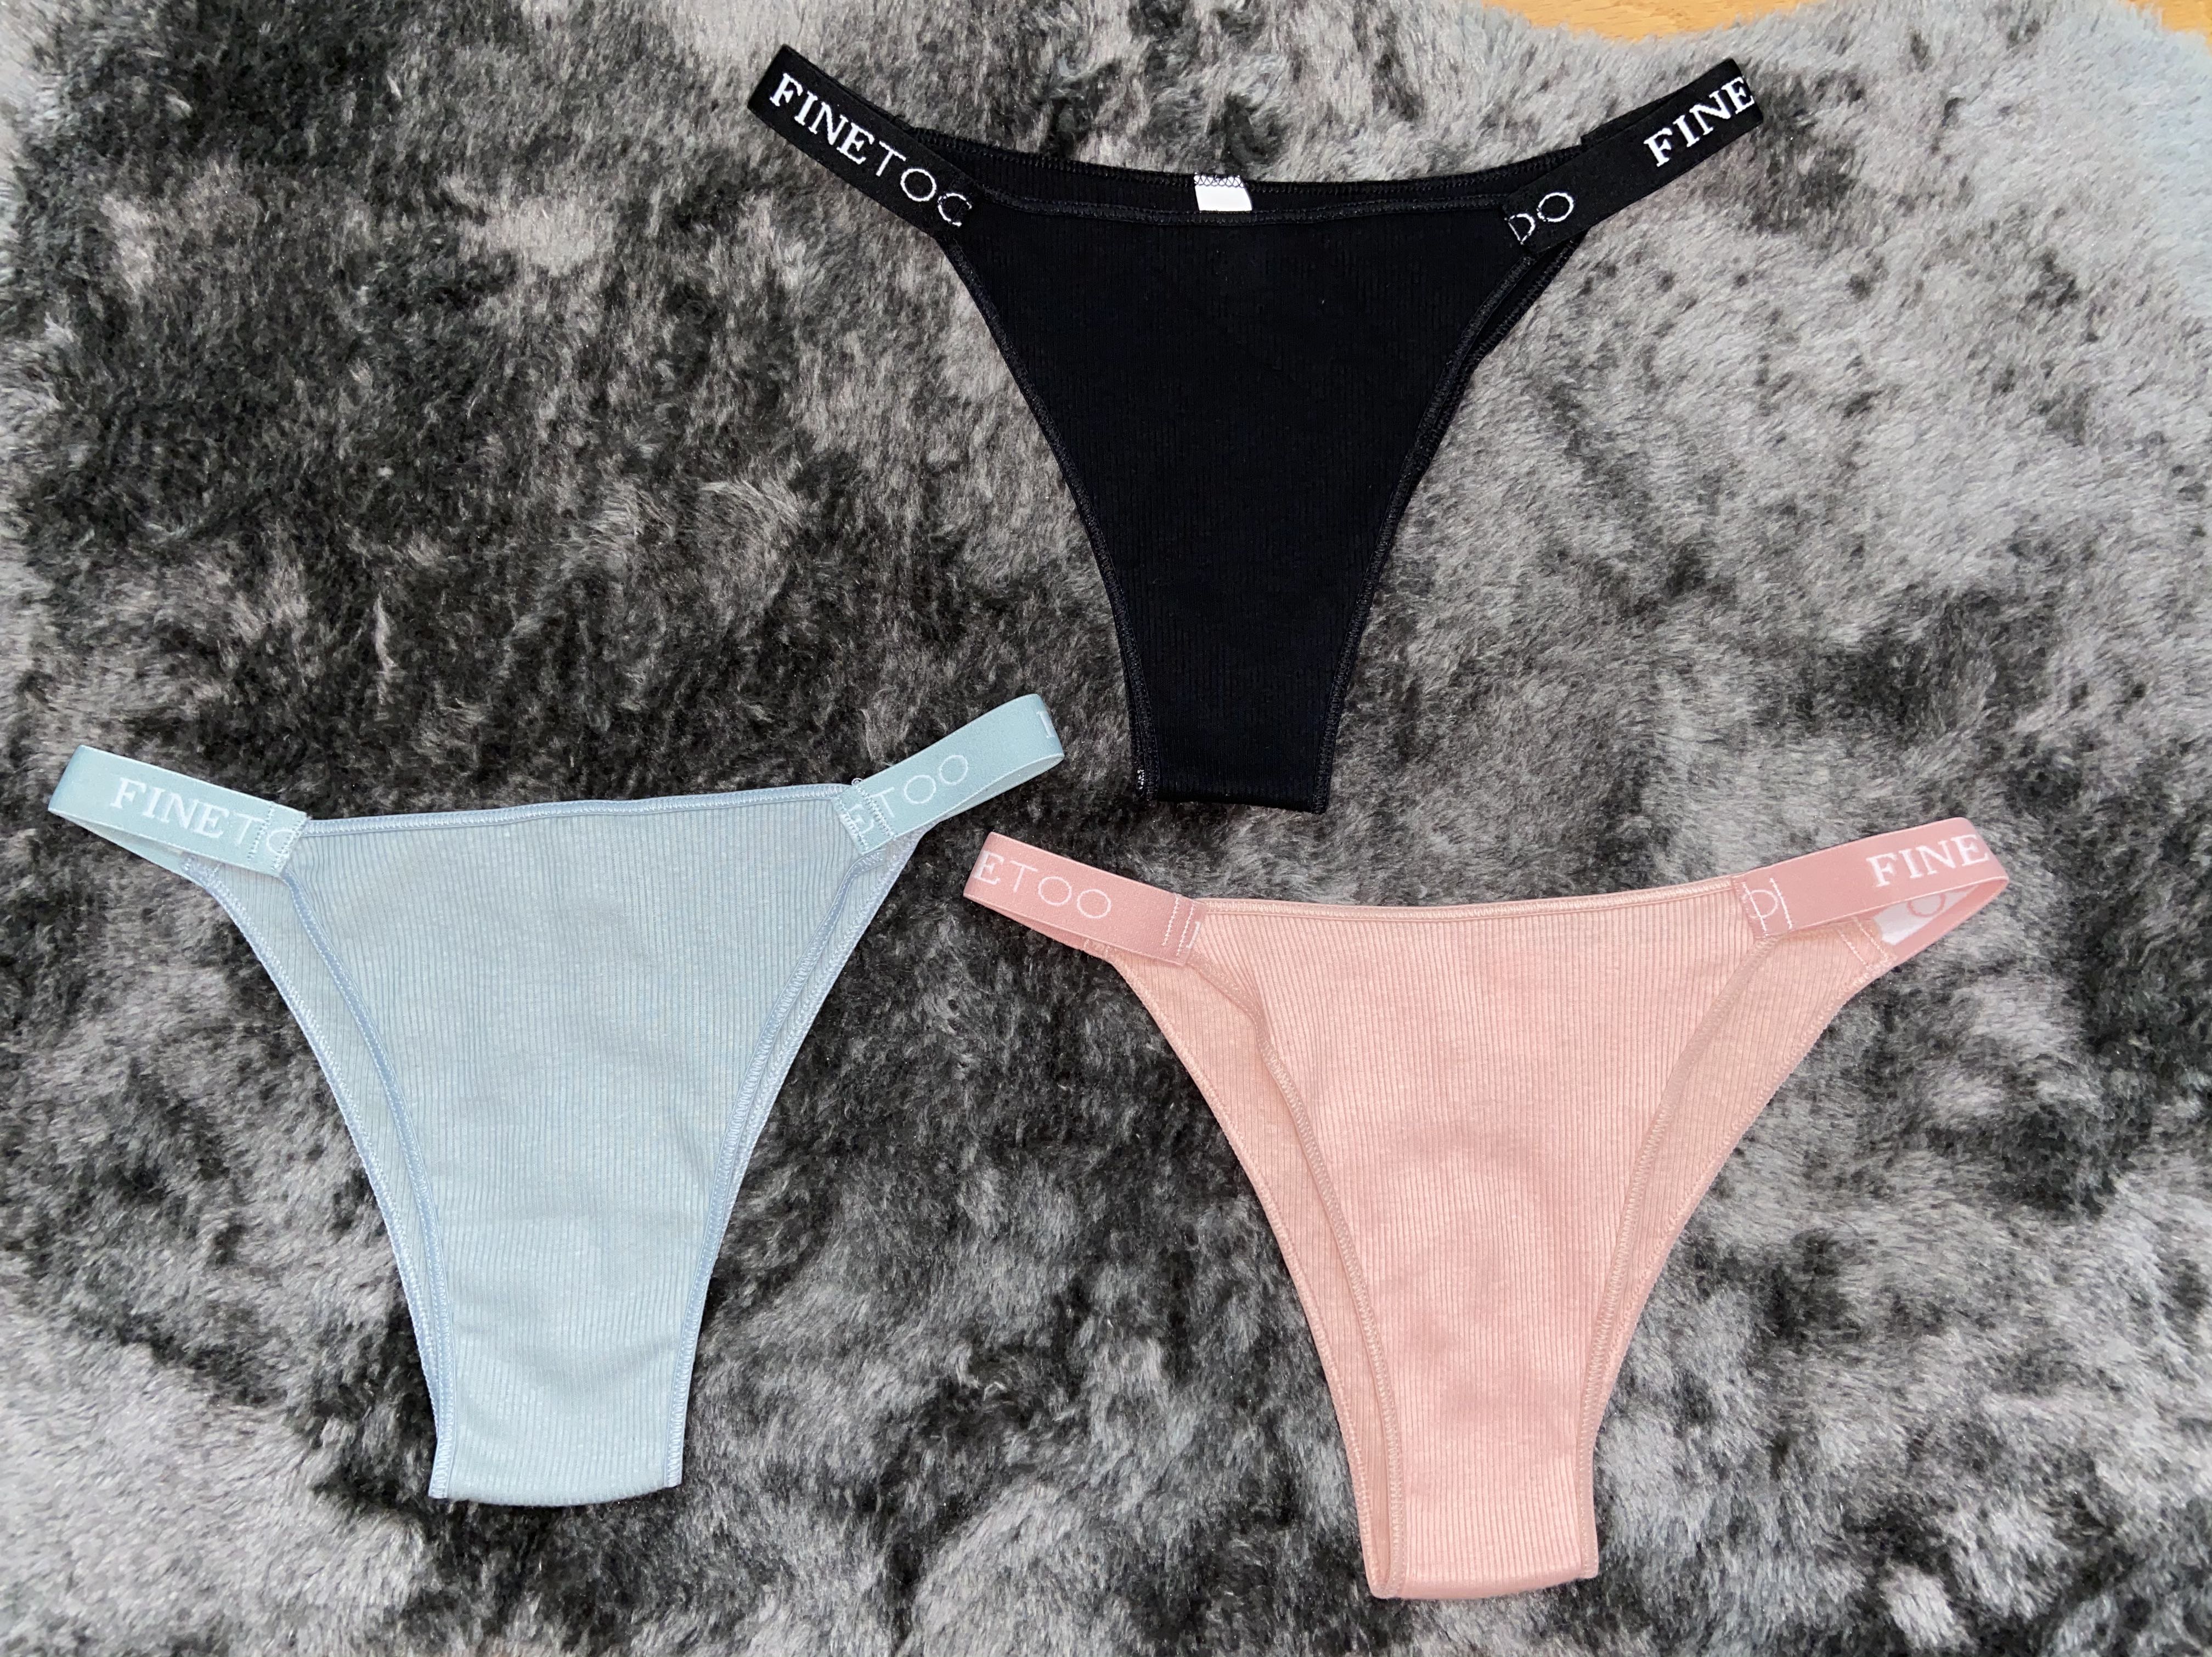 SEXY THONGS/PANTIES FOR SALE, Women's Fashion, New Undergarments